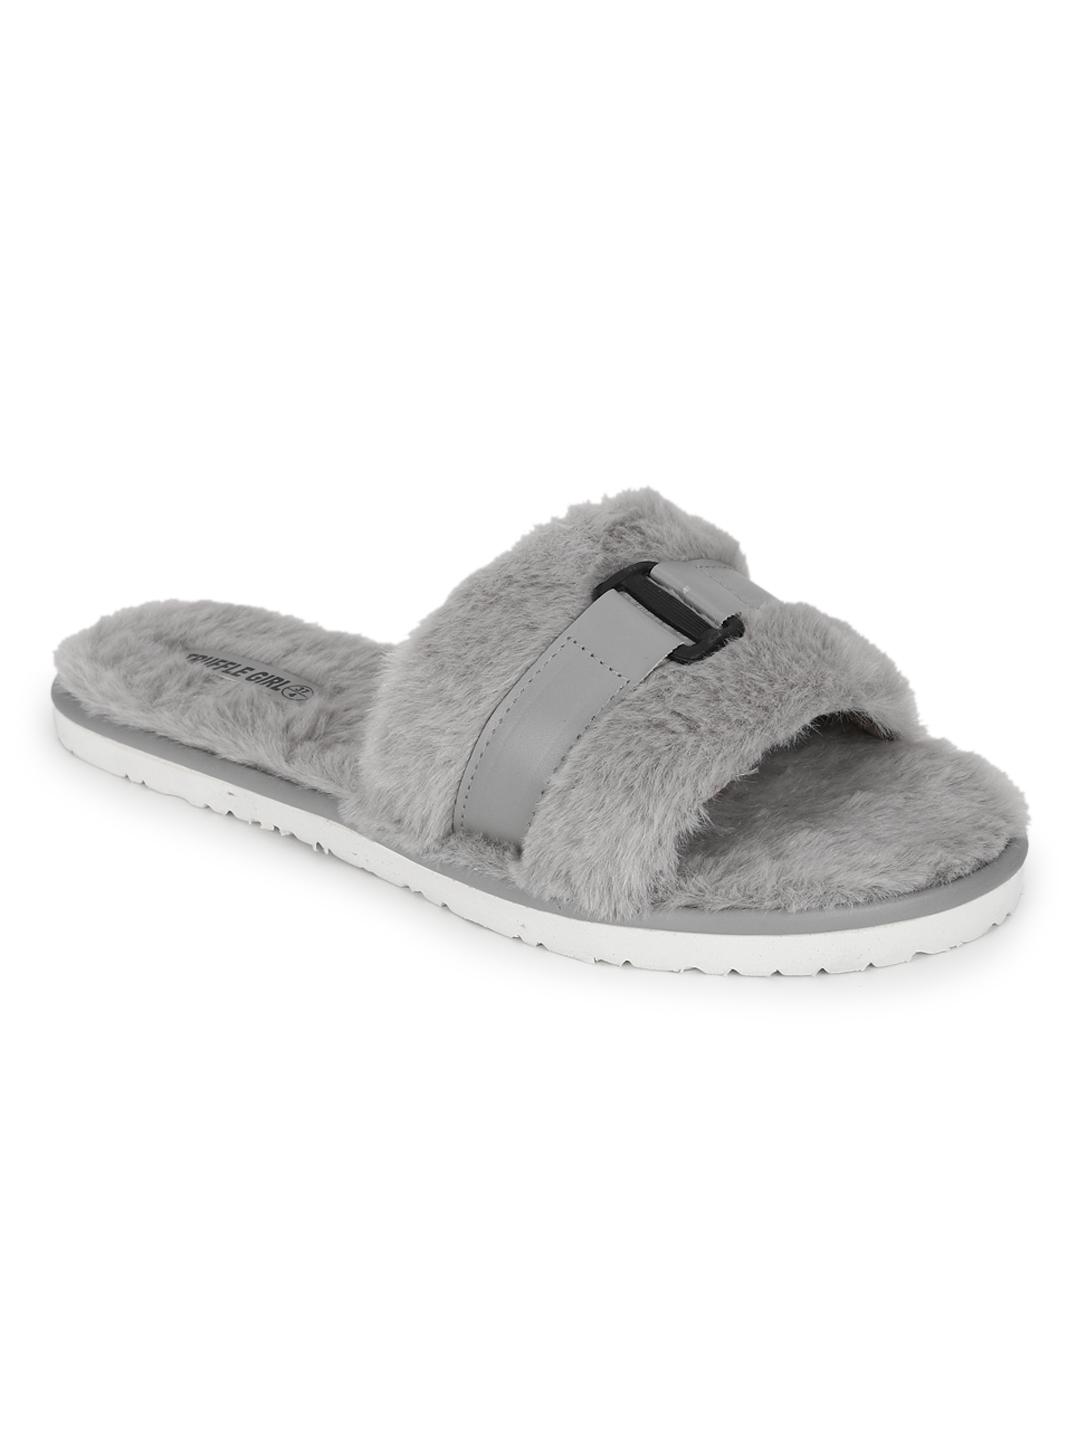 Truffle Collection | Grey Fuzzy Fur Slip Ons With Buckle